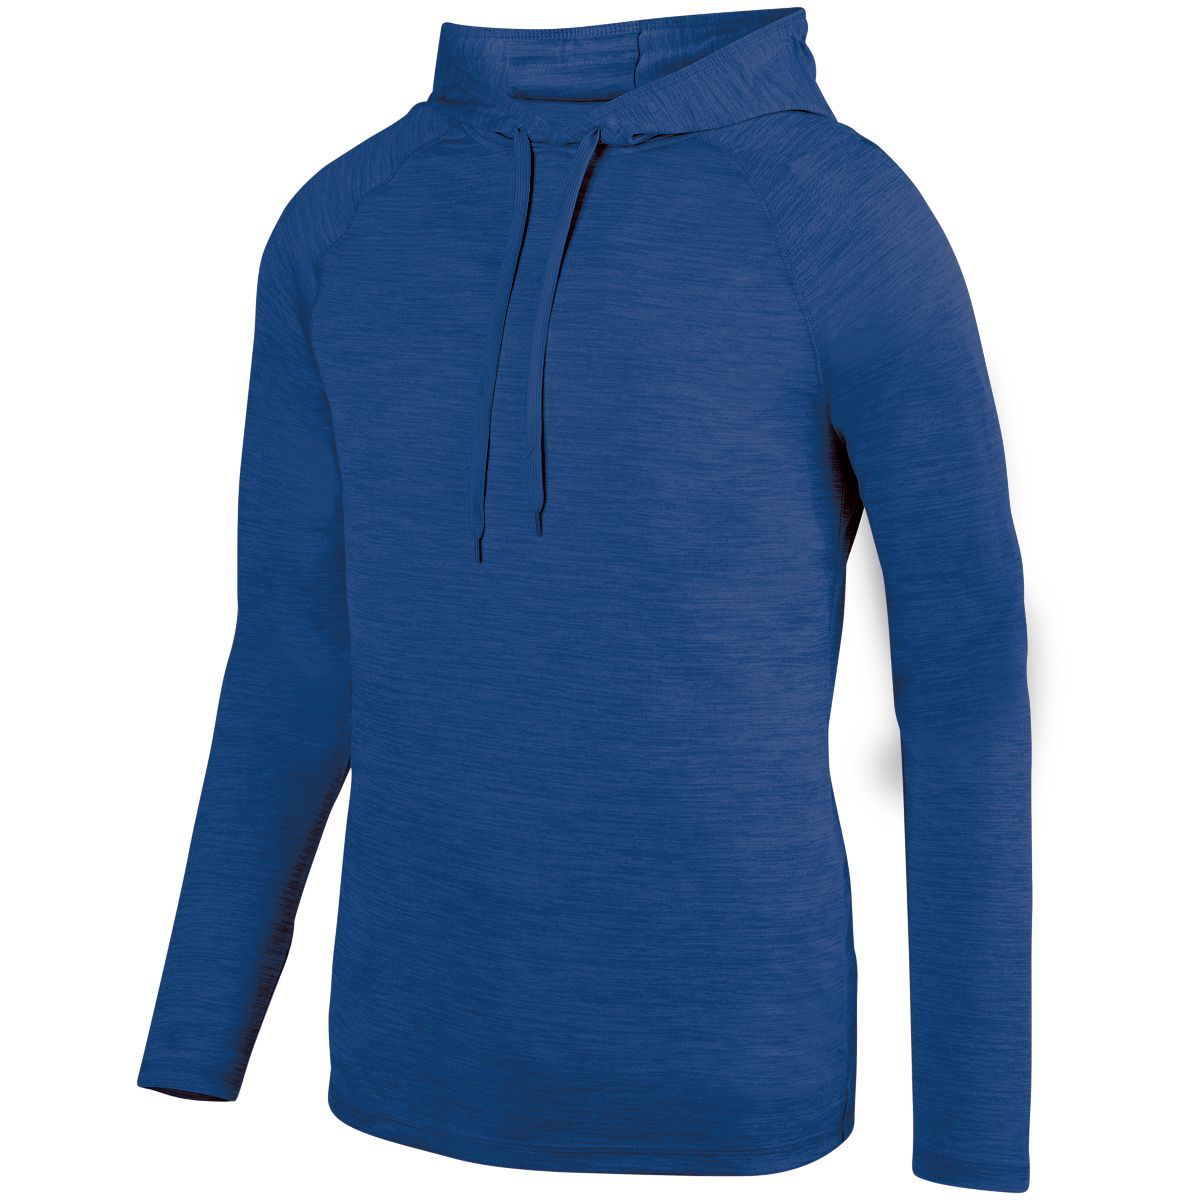 Augusta Sportswear Shadow Tonal Heather Hoodie in Royal  -Part of the Adult, Augusta-Products, Shirts, Tonal-Fleece-Collection product lines at KanaleyCreations.com